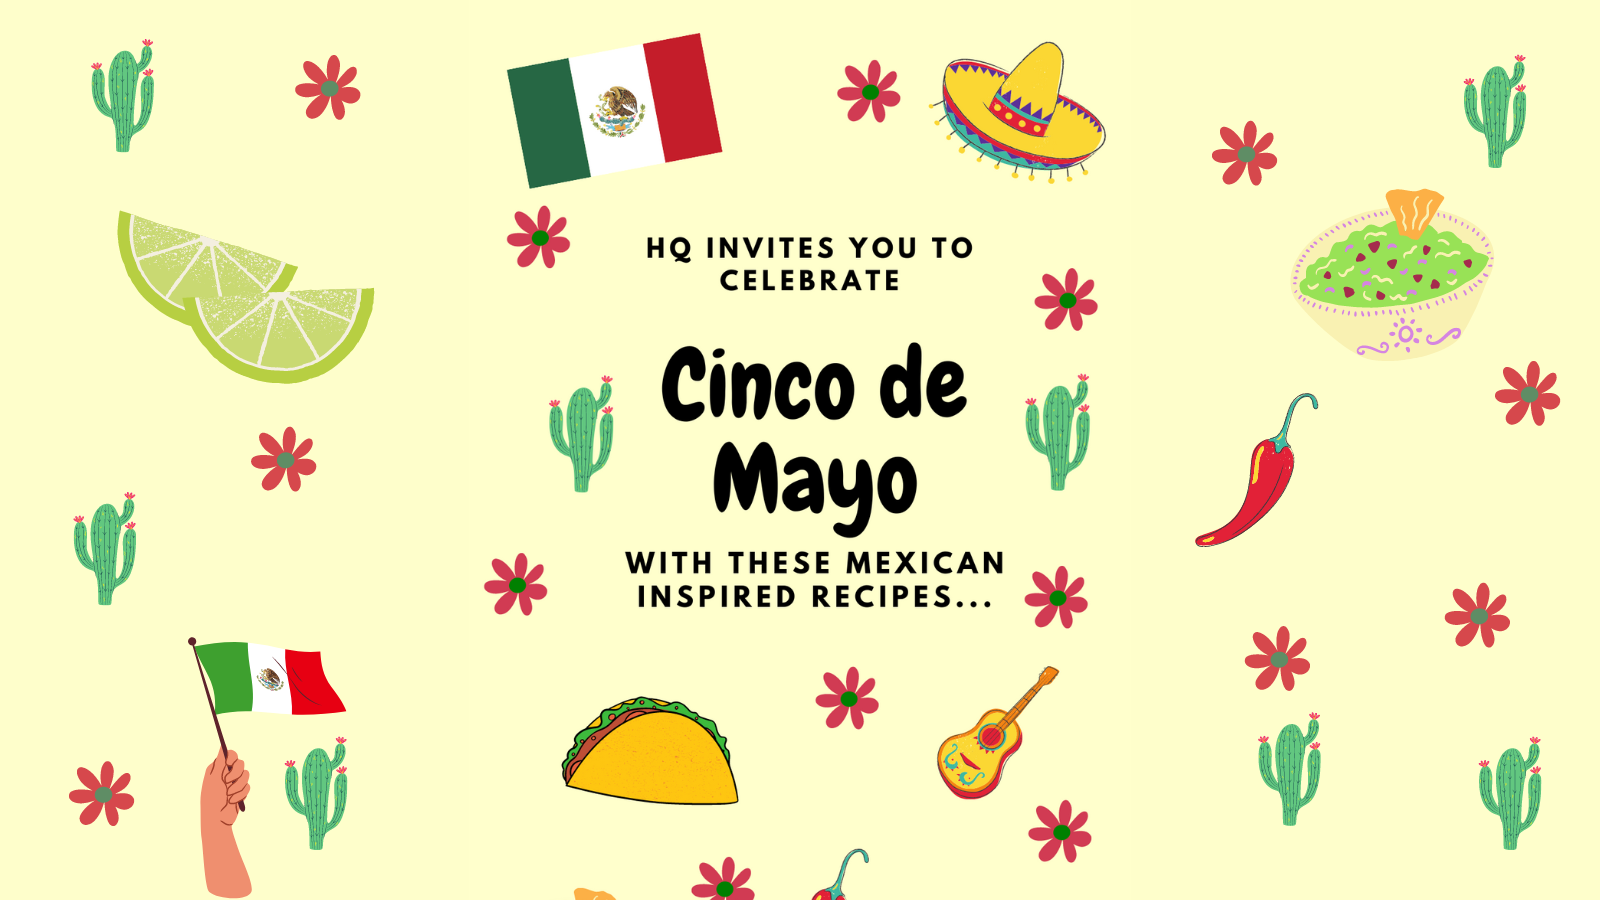 Image shows a colourful banner that reads 'HQ invites you to celebrate Cinco de Mayo'